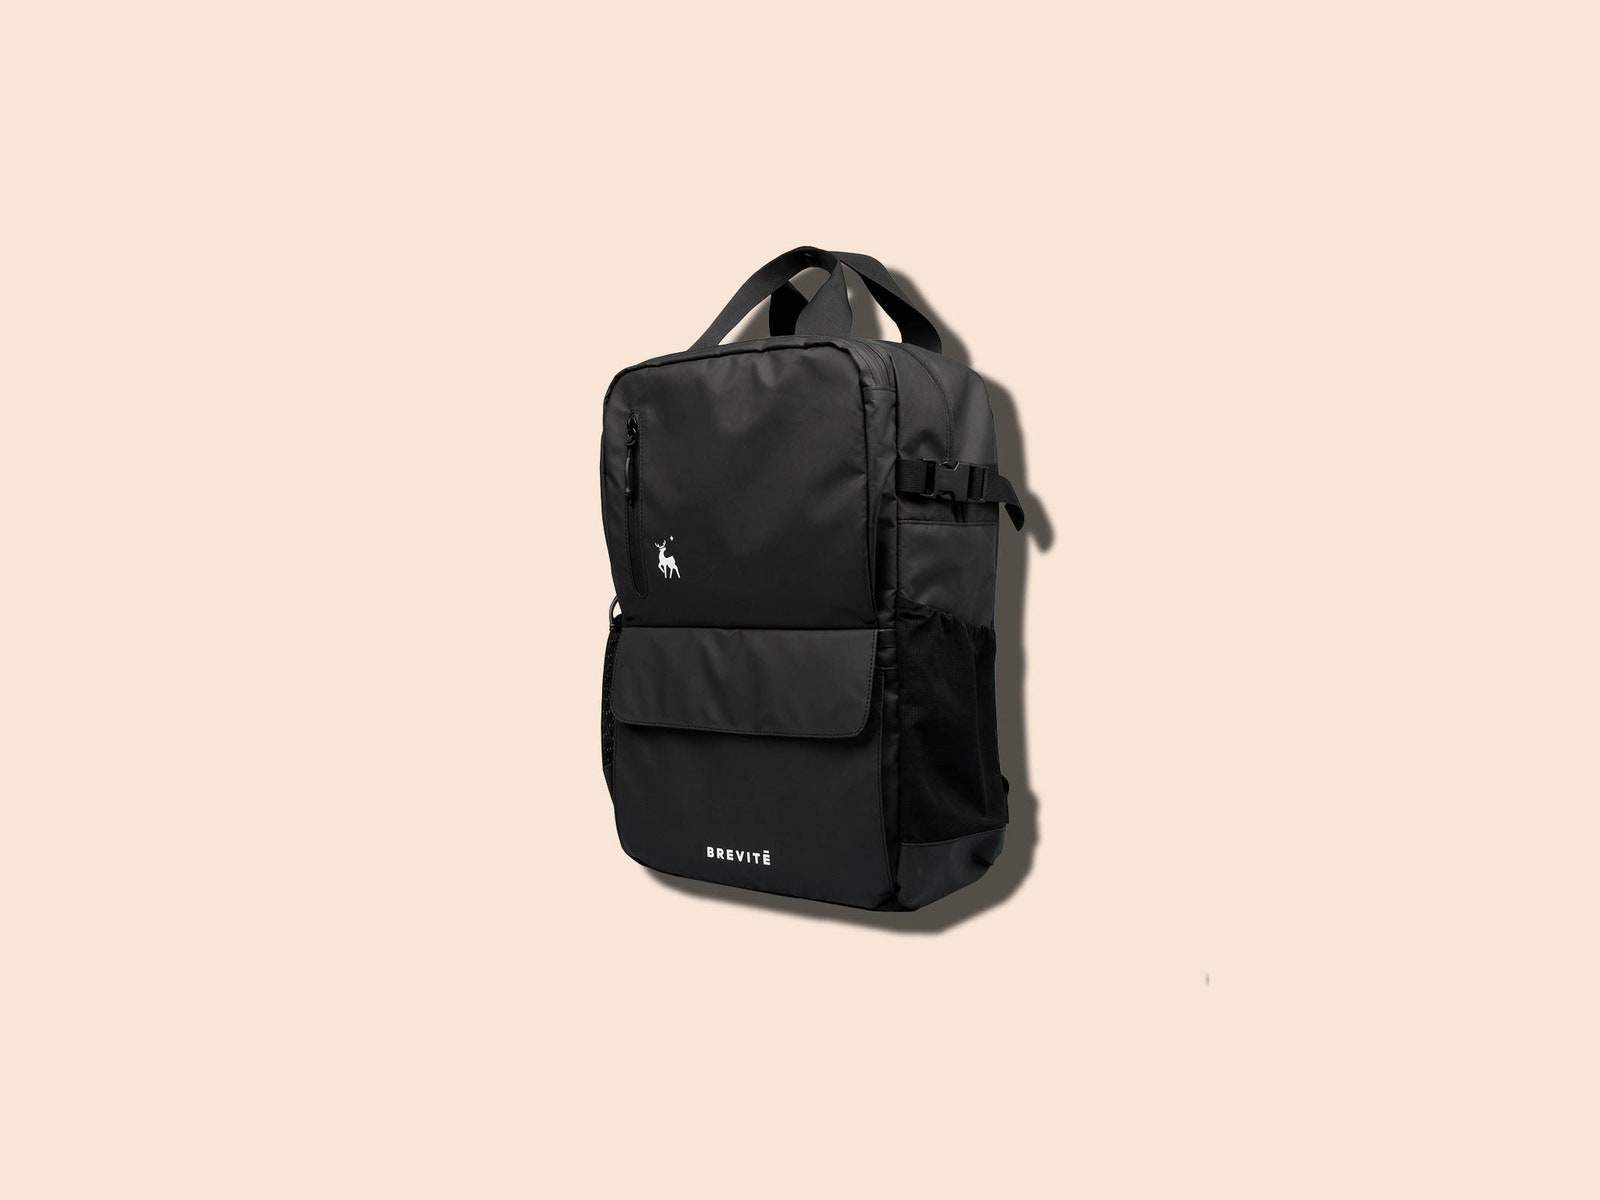 Scout two bag